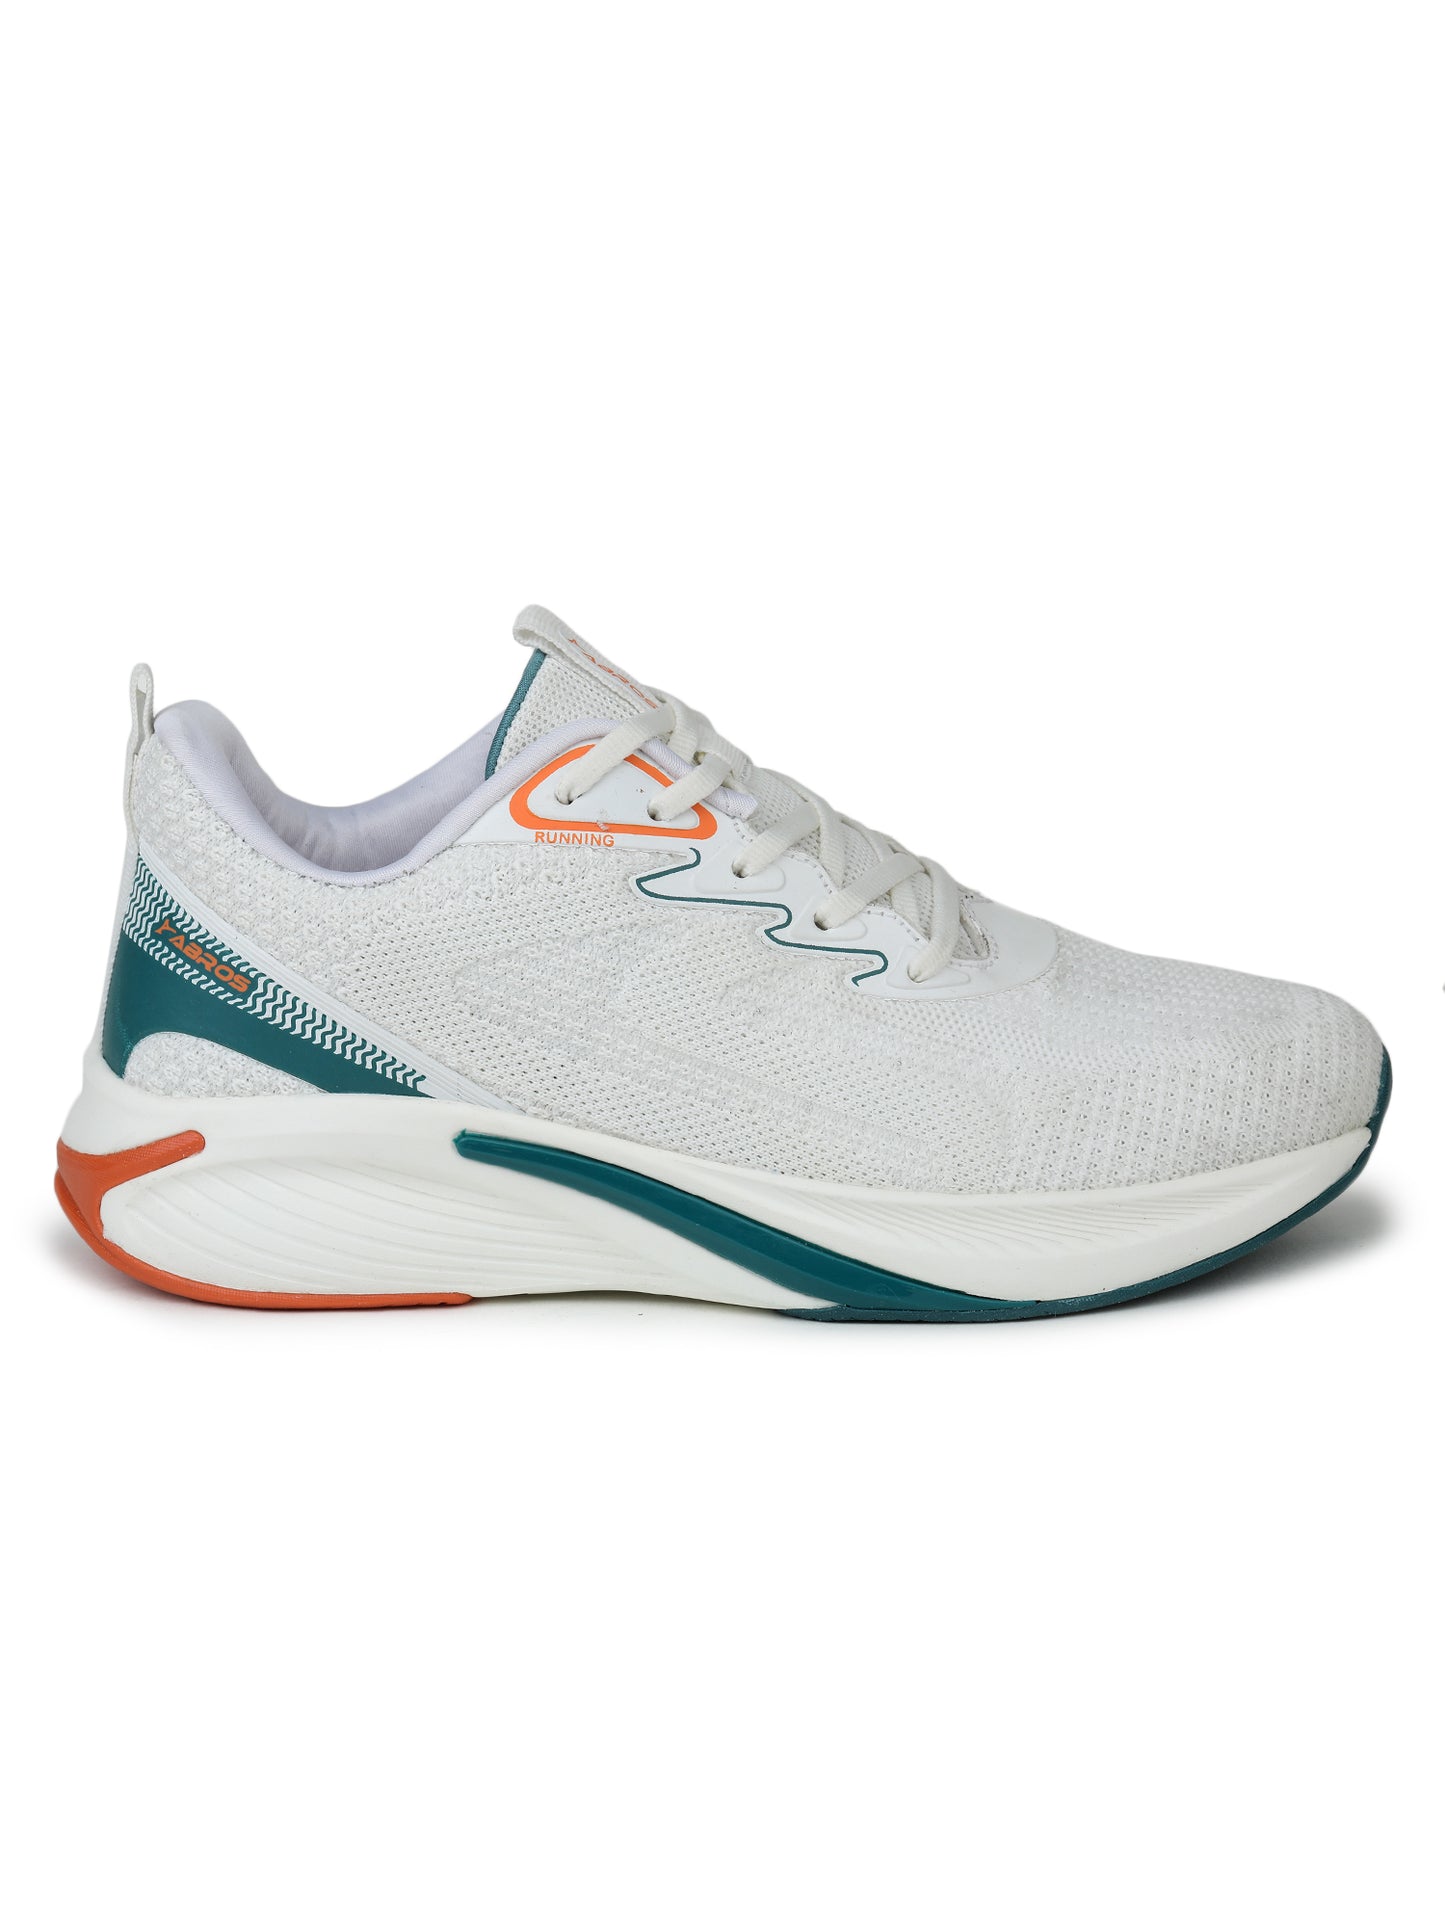 ABROS STARE-ON SPORT-SHOES For MEN'S